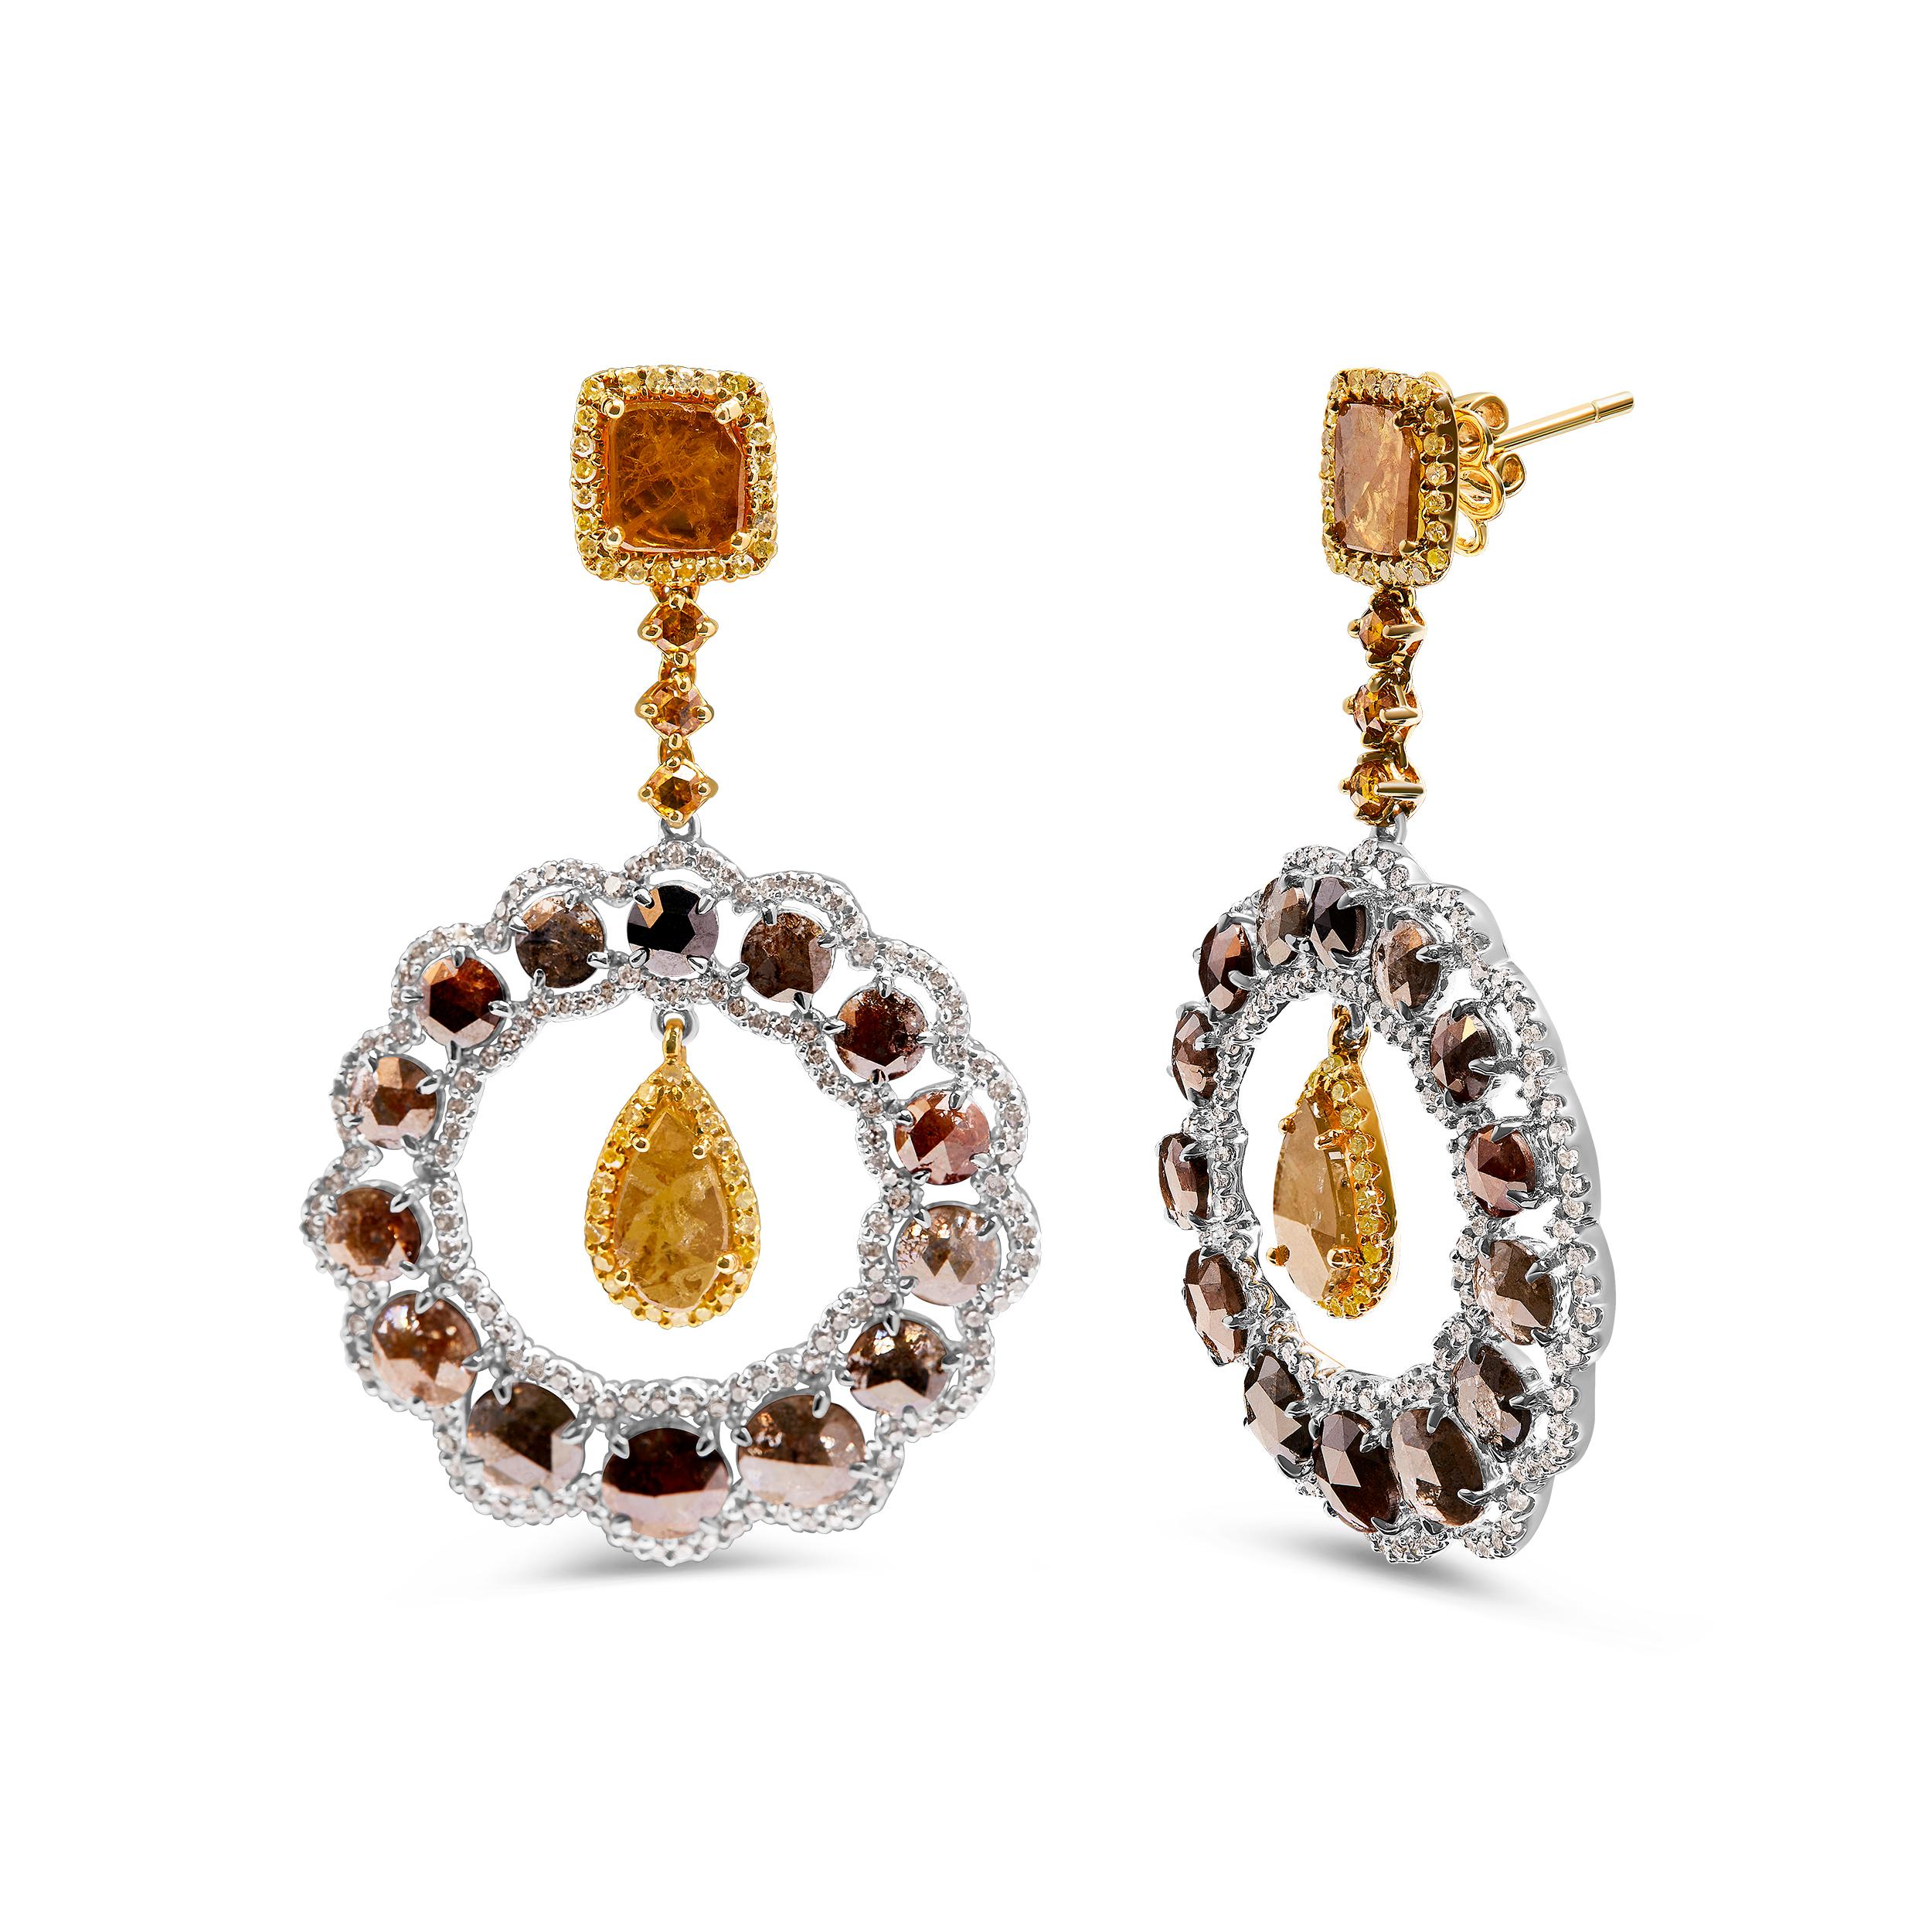 Introducing a mesmerizing masterpiece that effortlessly combines elegance and extravagance. These 14K White and Yellow Gold Dangle Hoop and Bale Earrings are a dazzling embodiment of opulence. Crafted with meticulous care, these earrings boast a